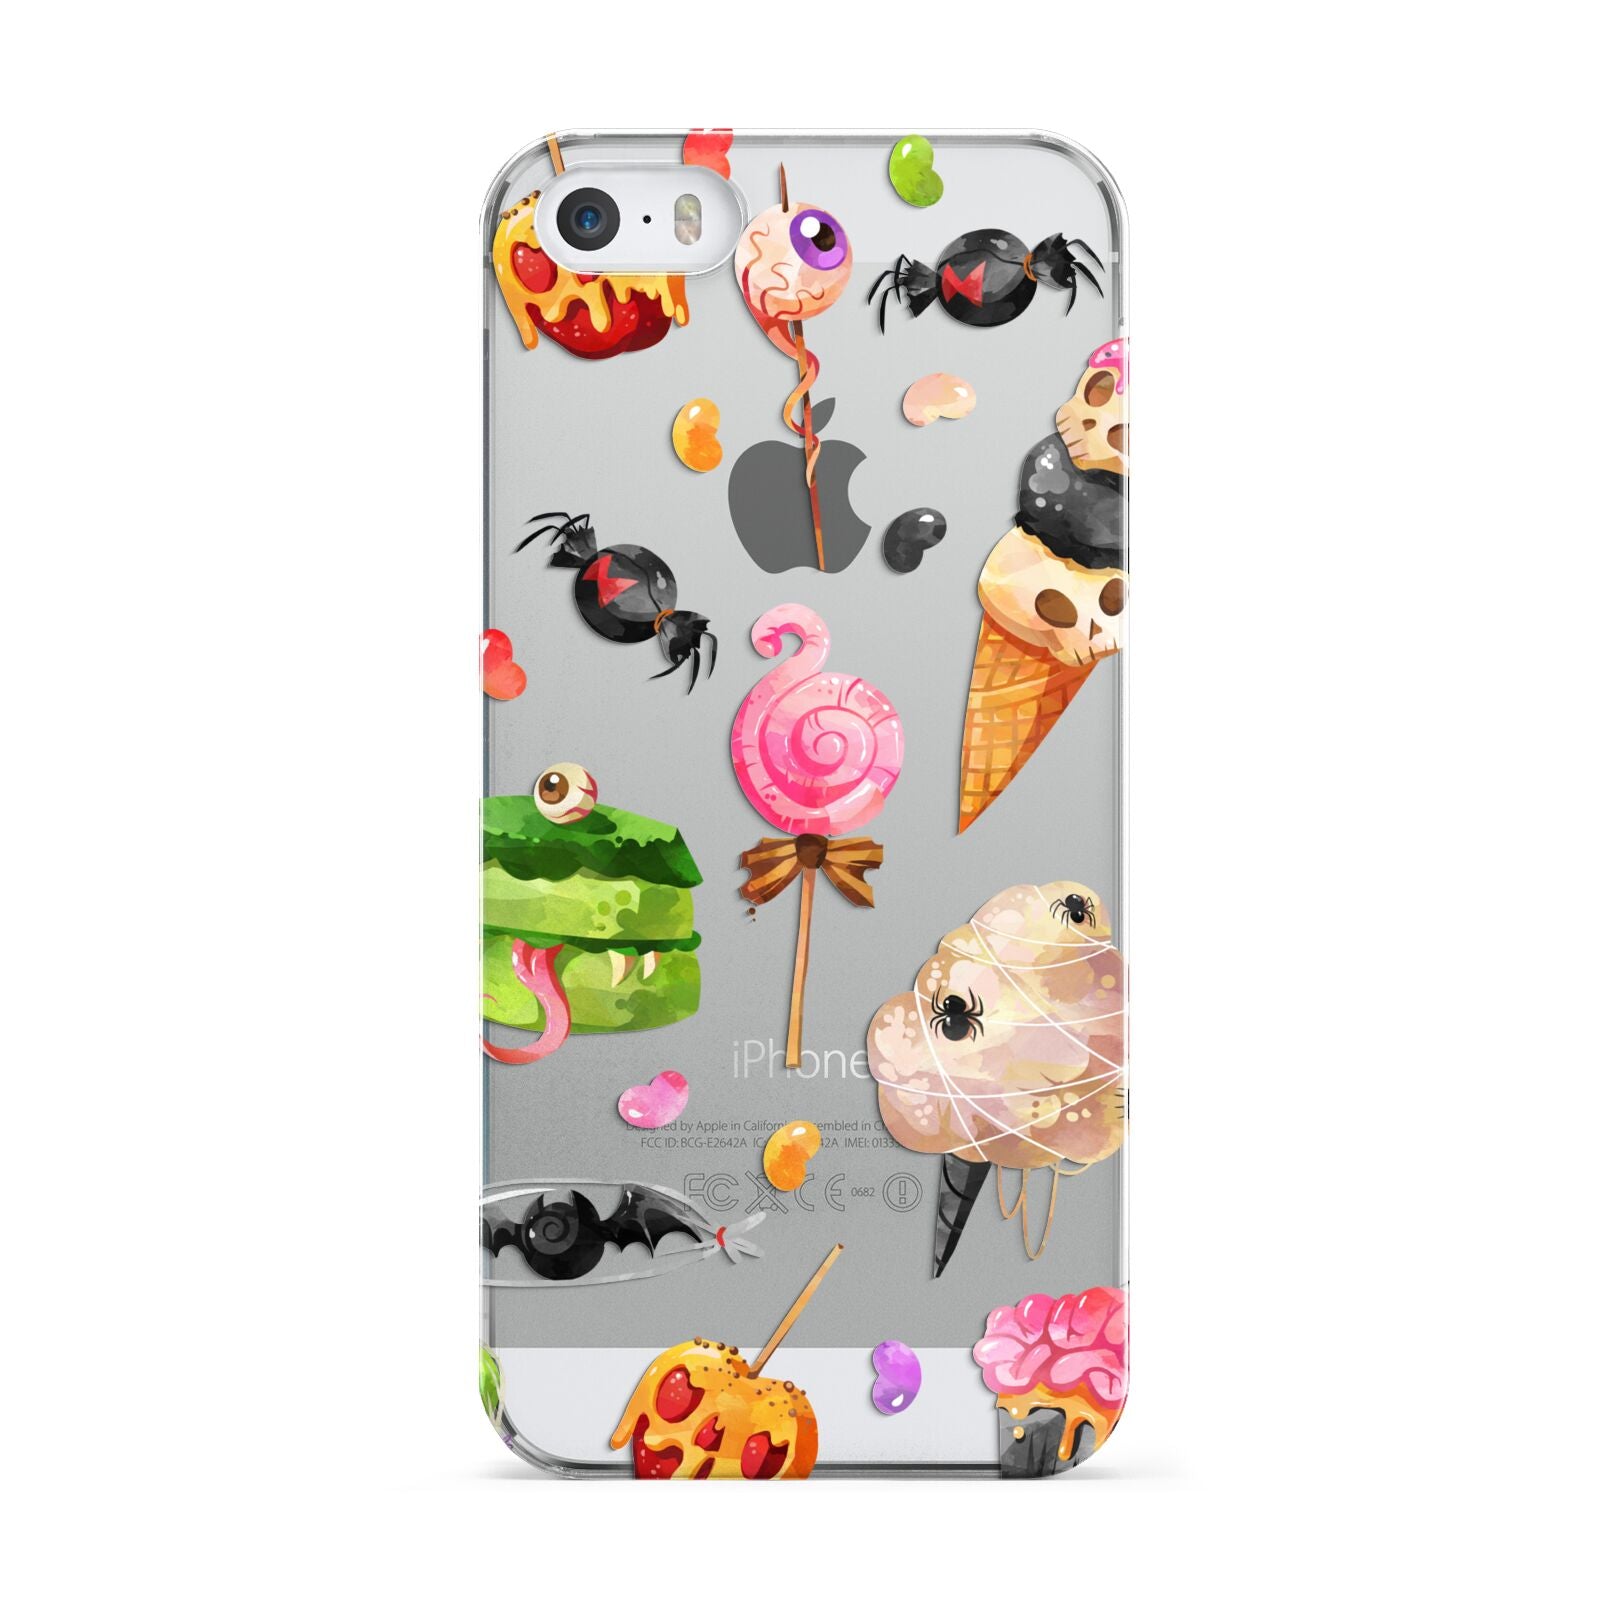 Halloween Cakes and Candy Apple iPhone 5 Case